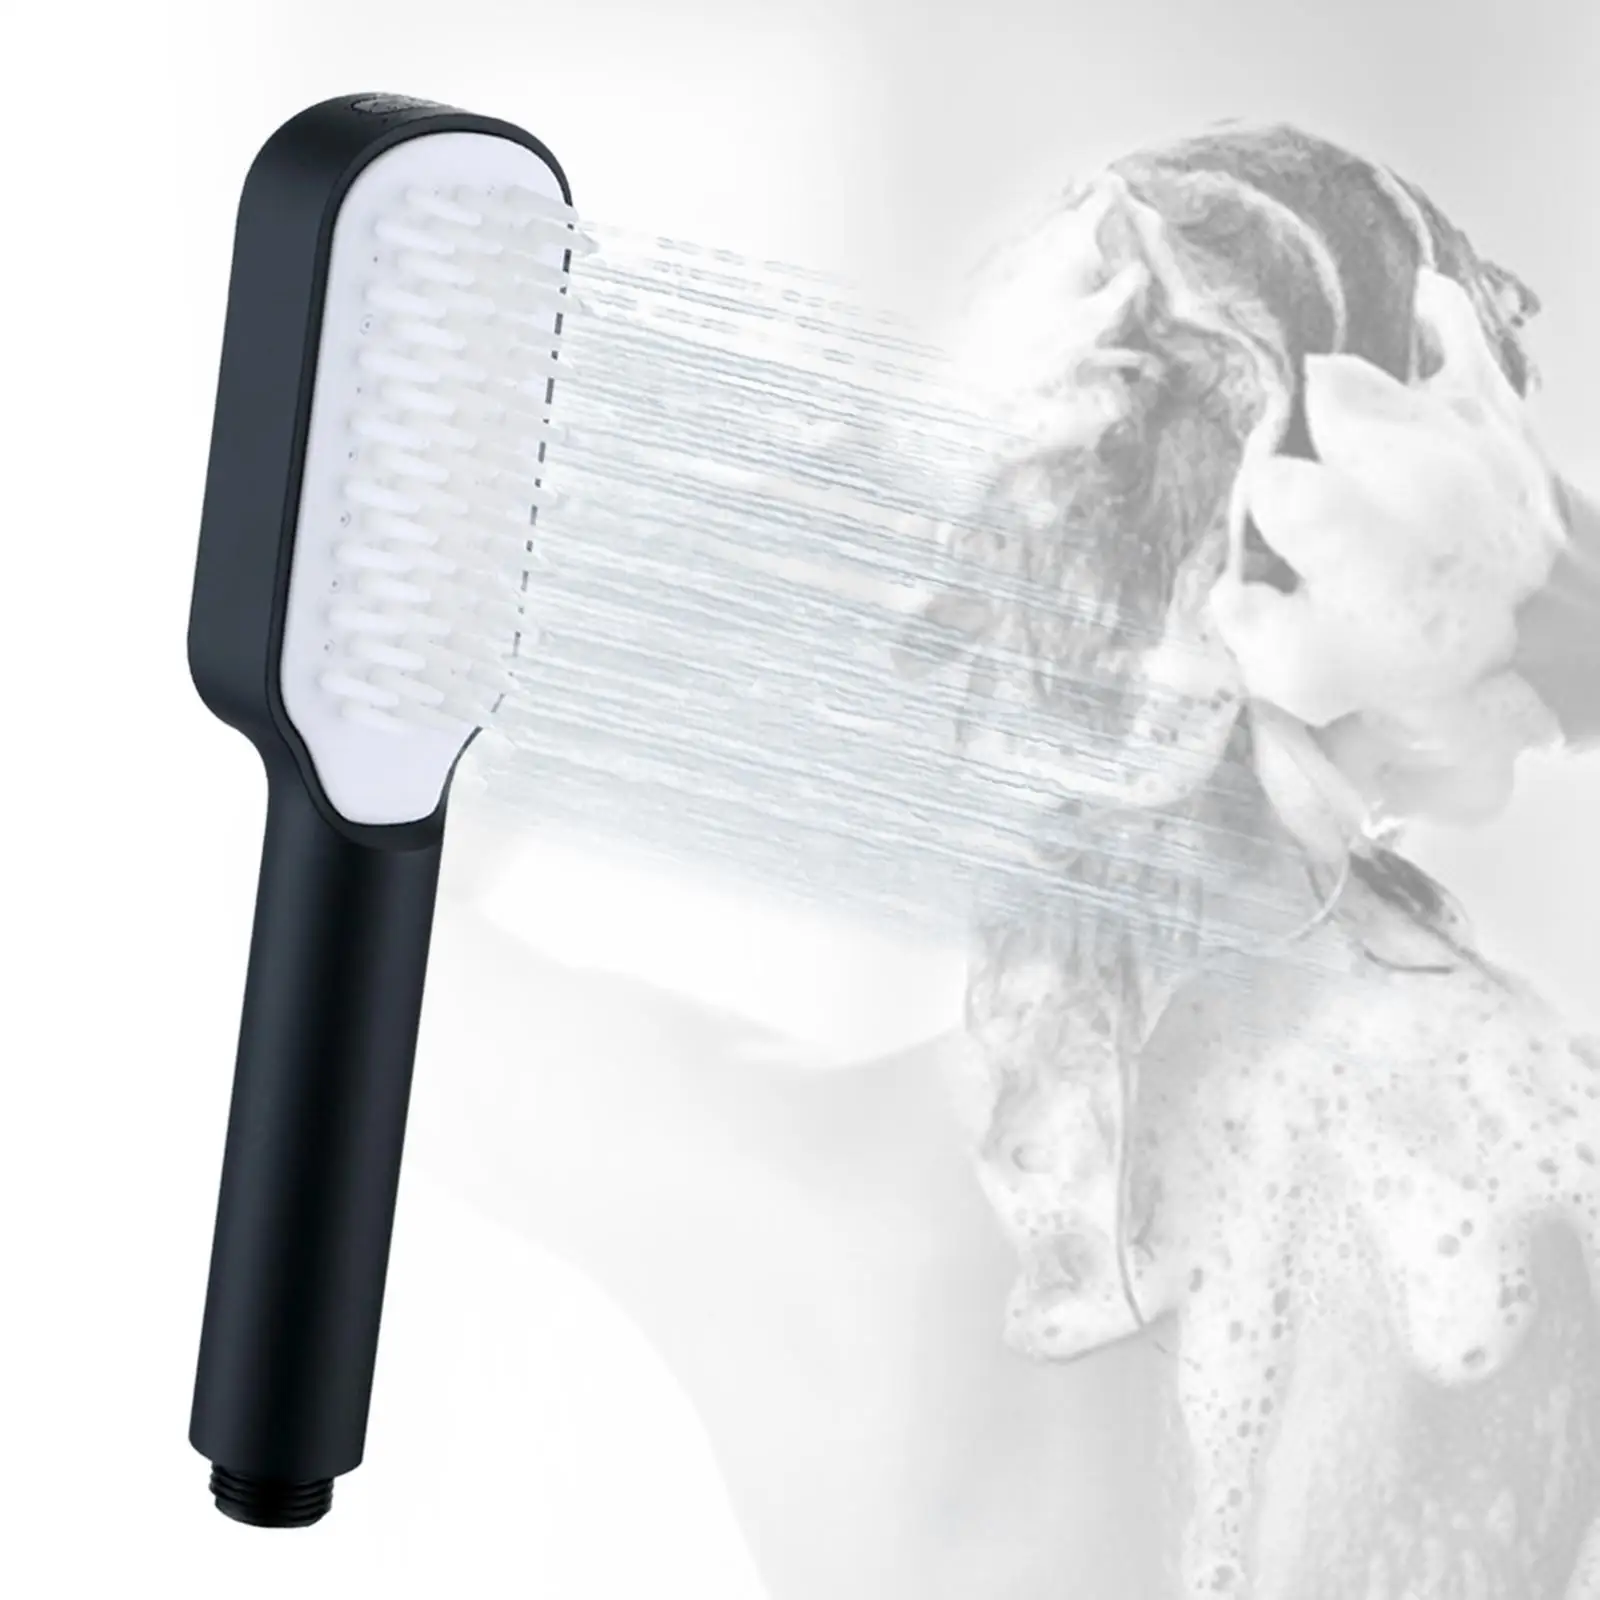 with Massage Combs Rainfall Fits 1/2inch Adapter Saving Water Cleaning Your Shower, Bathroom Accessory